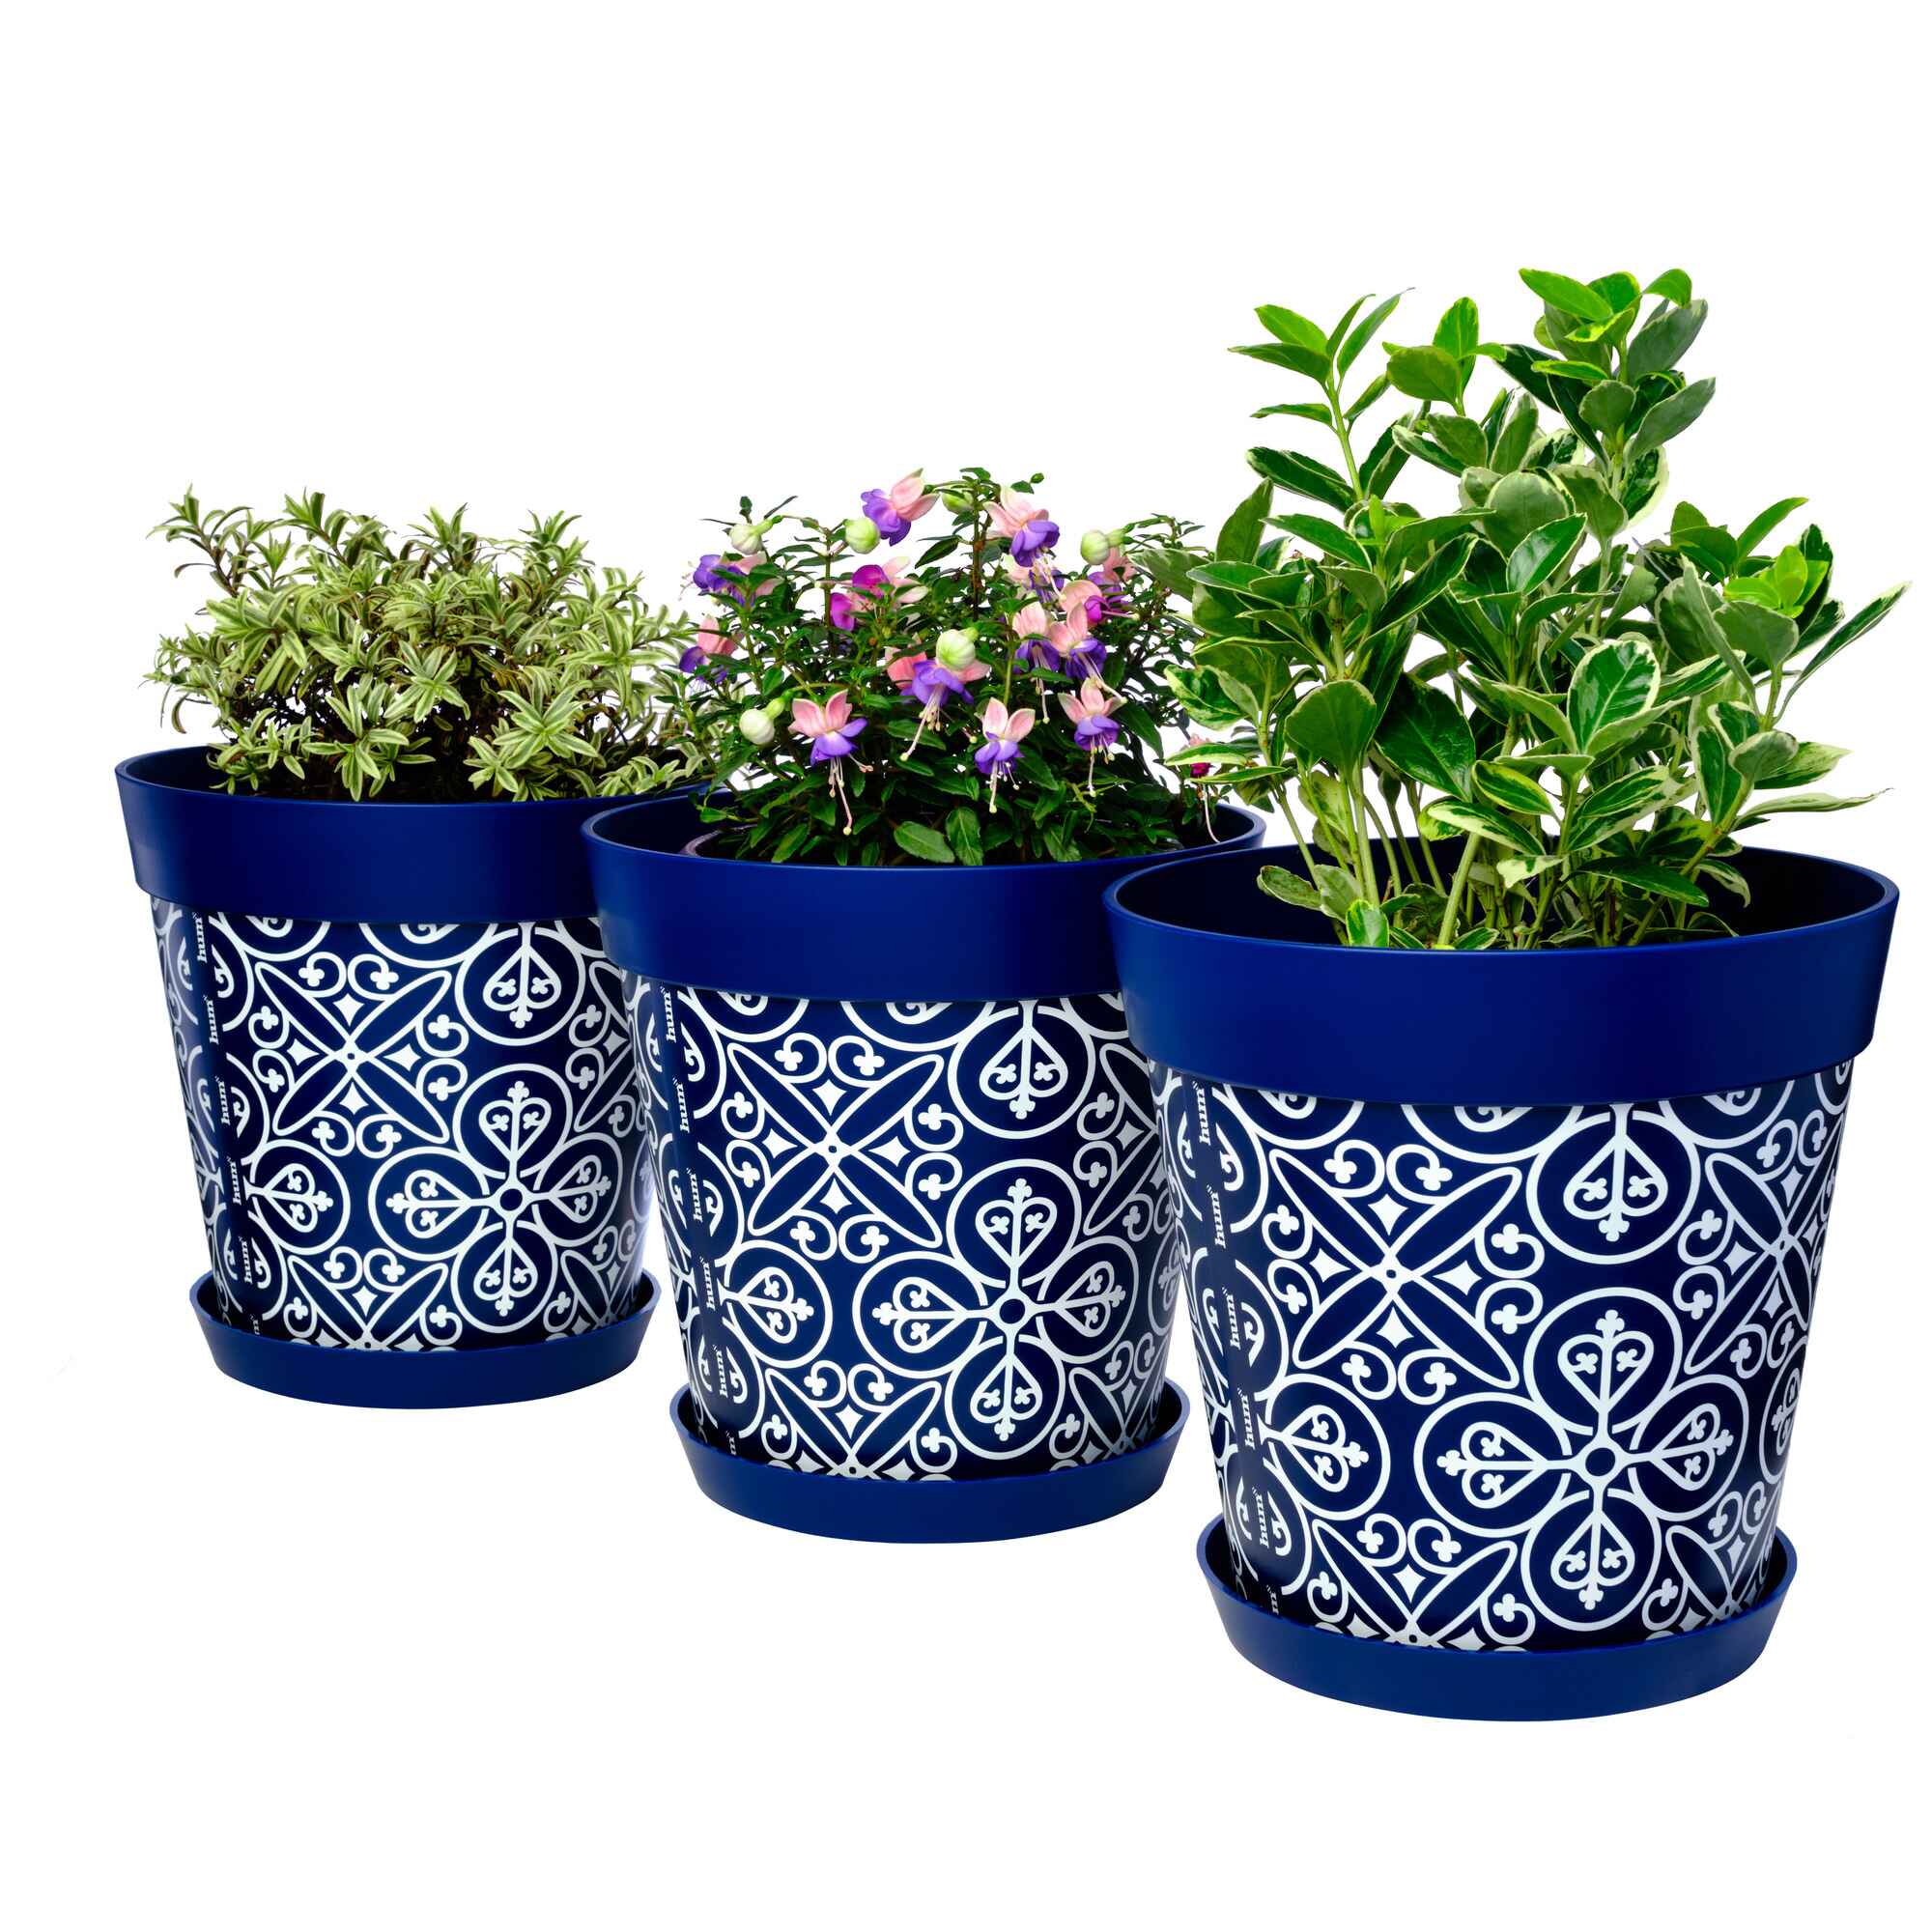 Picture of 3 Planted Large 25cm Blue Moroccan Style Indoor/Outdoor Flower Pot and Saucers 